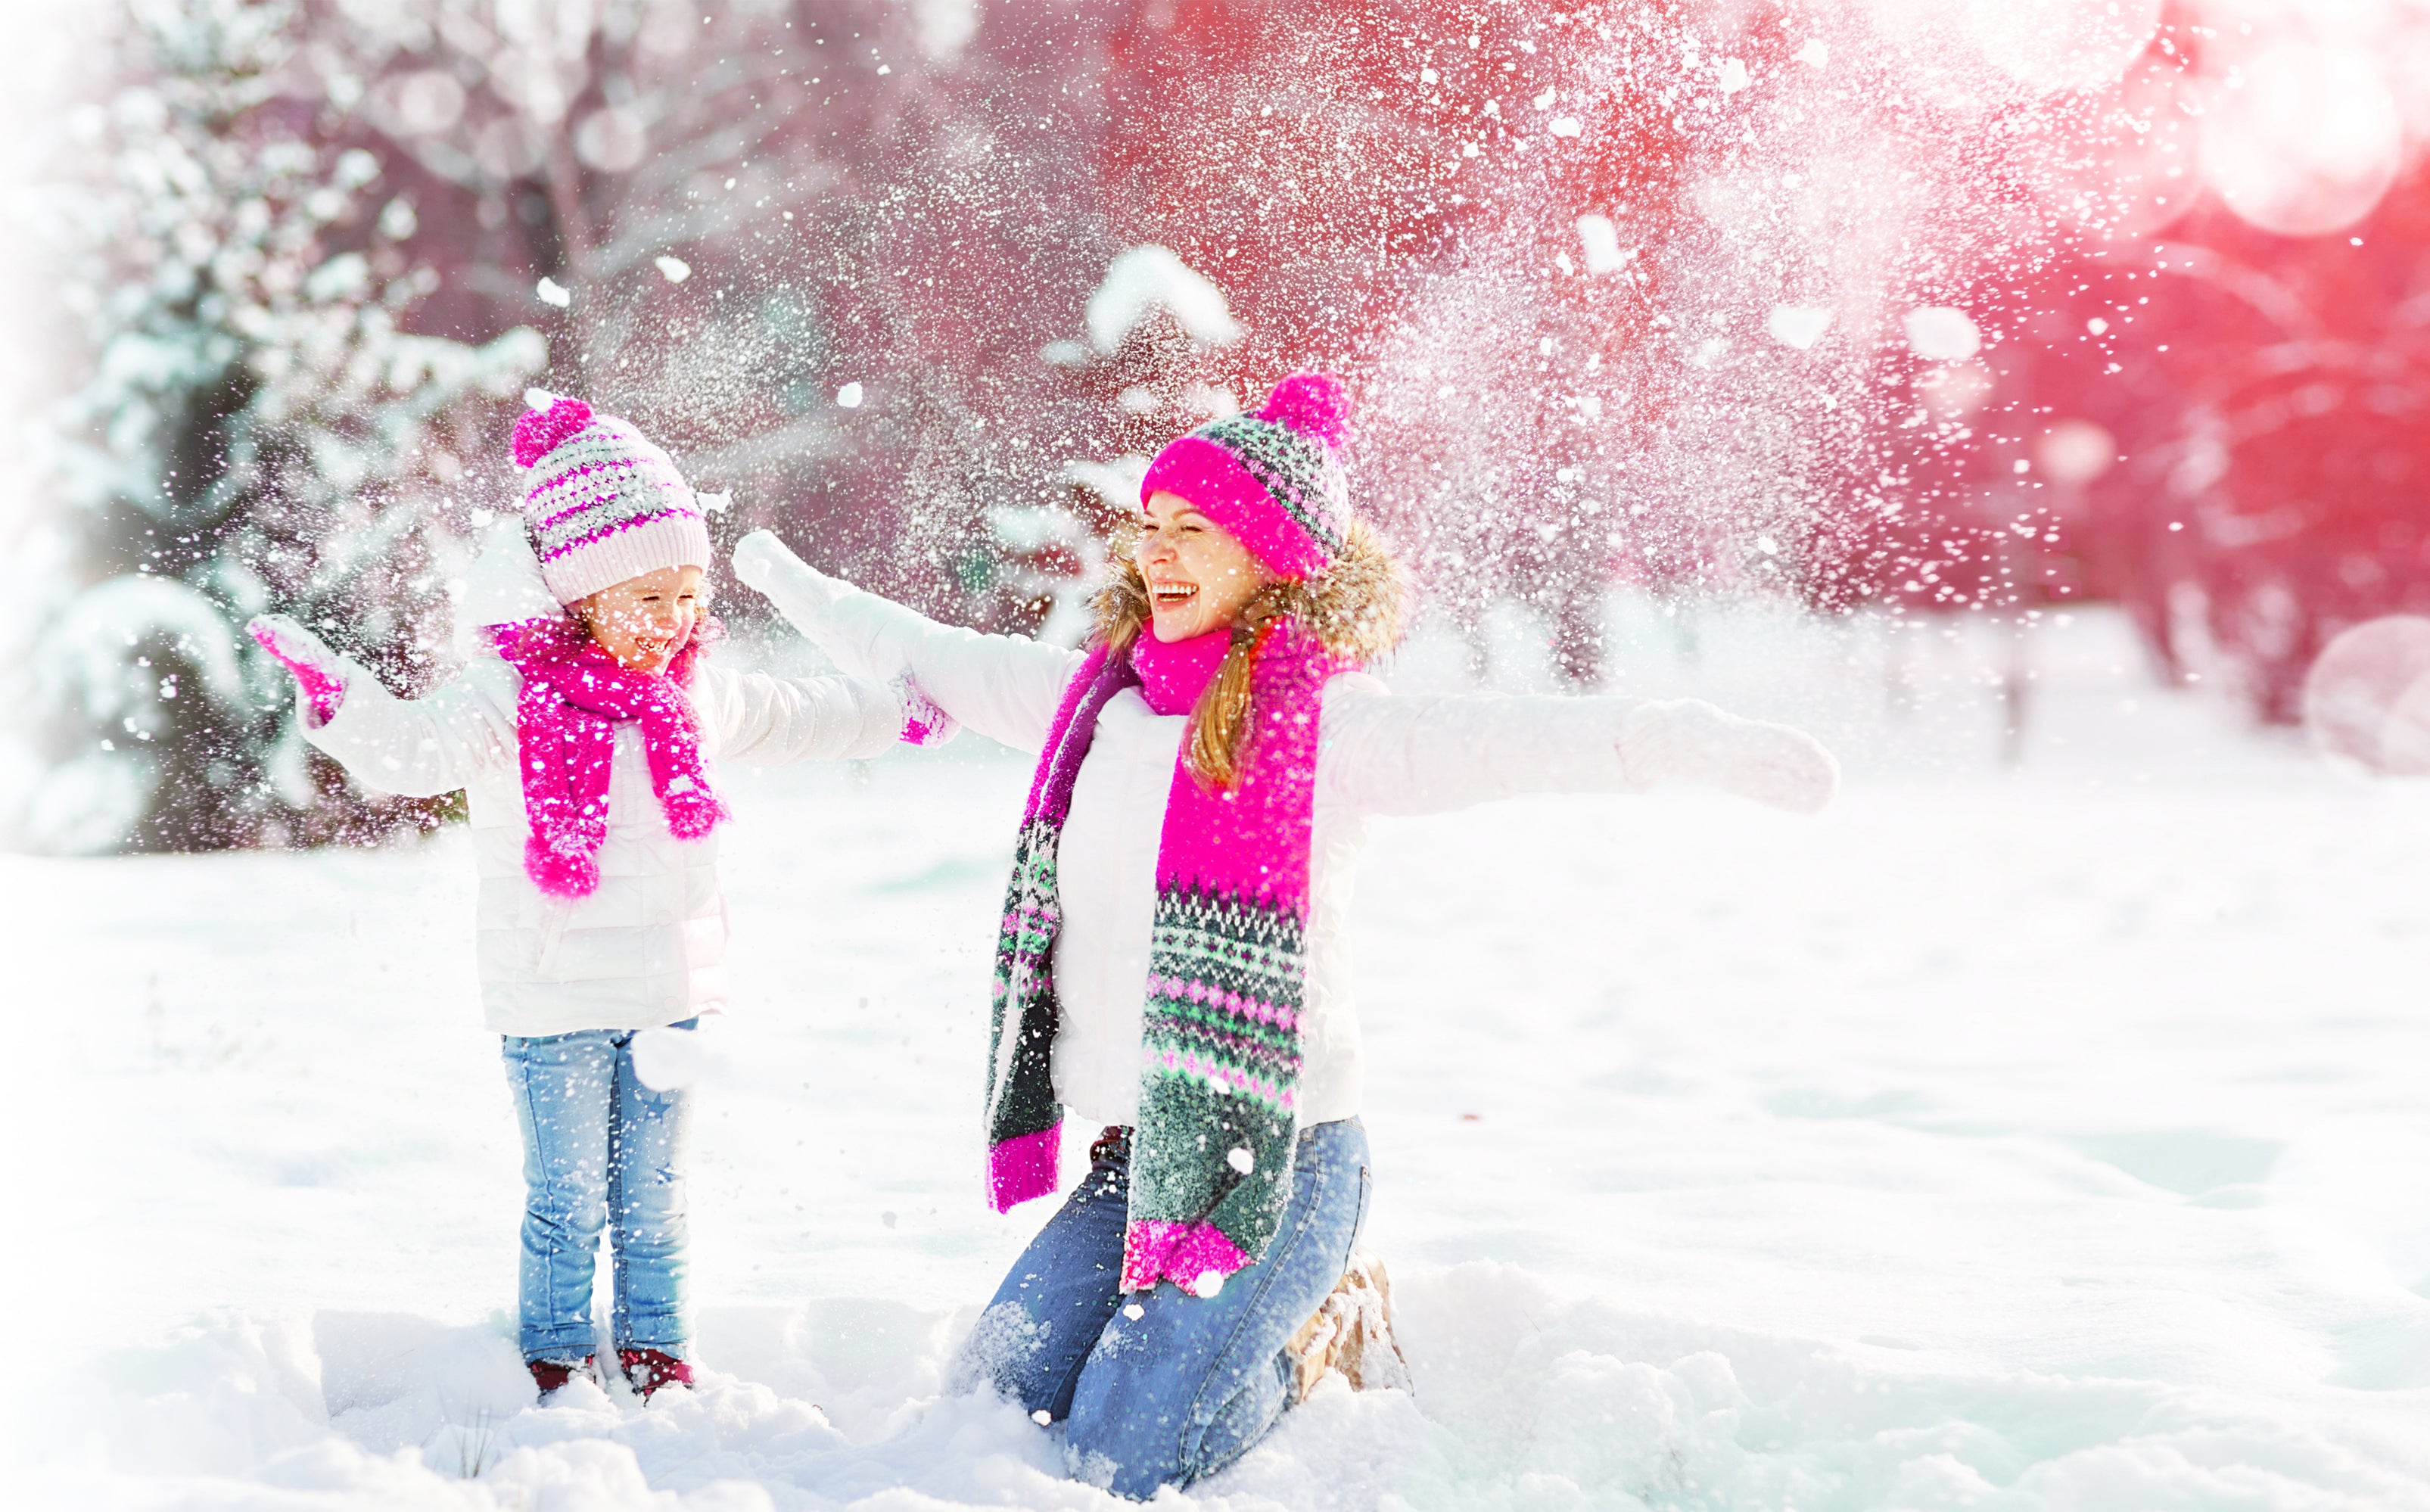 Mother and daughter wearing pink hats and scarfs playing in the snow